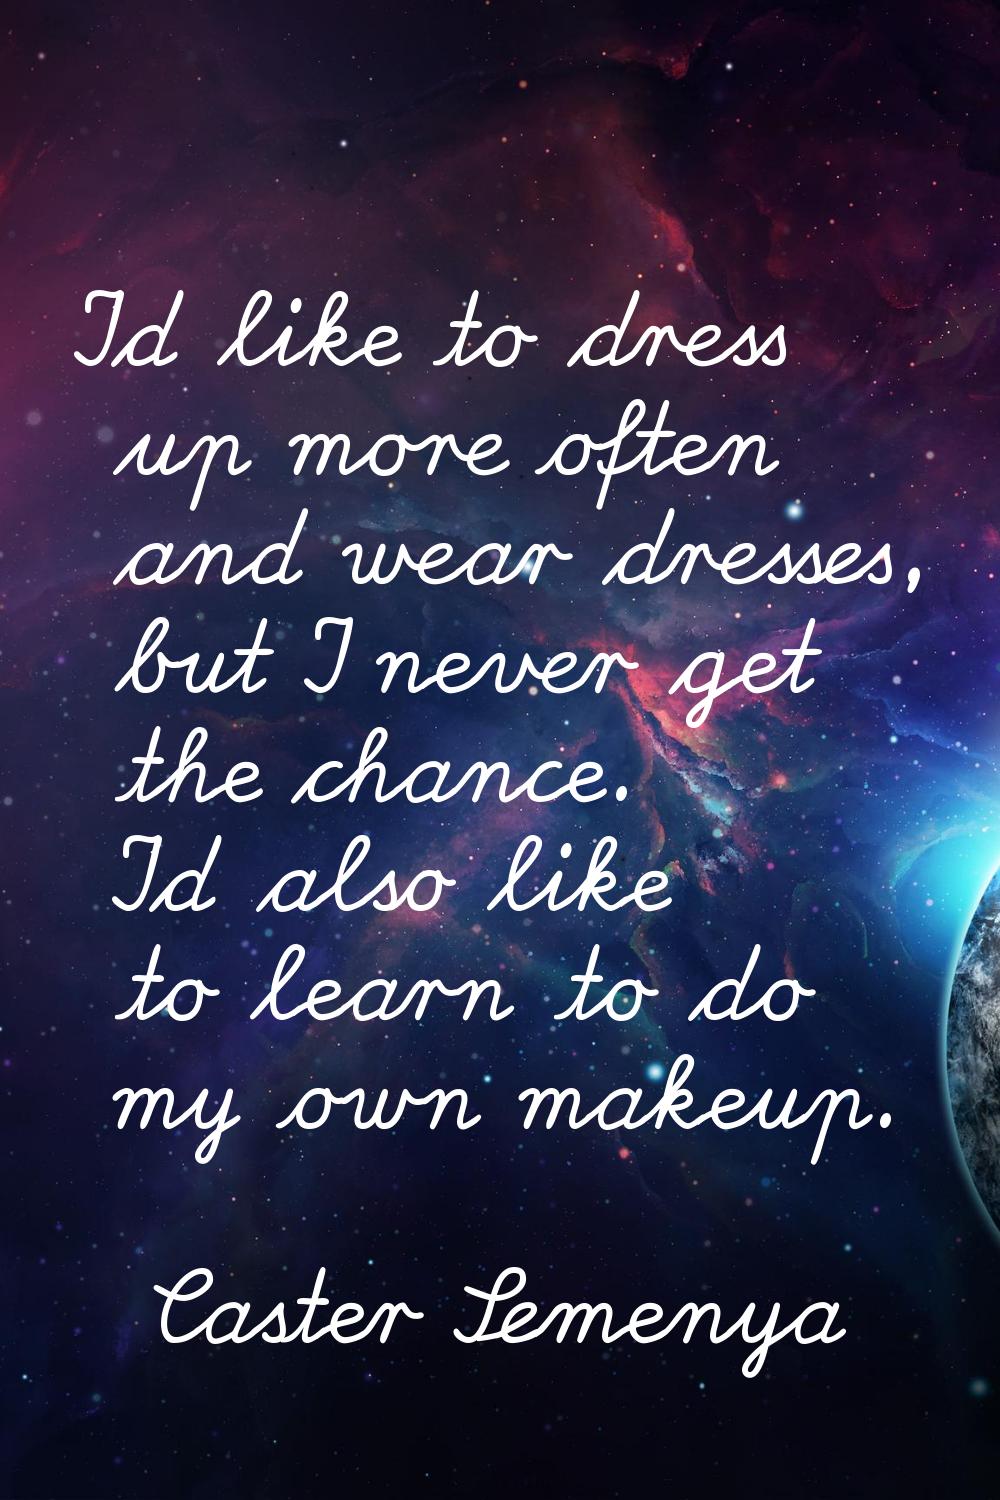 I'd like to dress up more often and wear dresses, but I never get the chance. I'd also like to lear